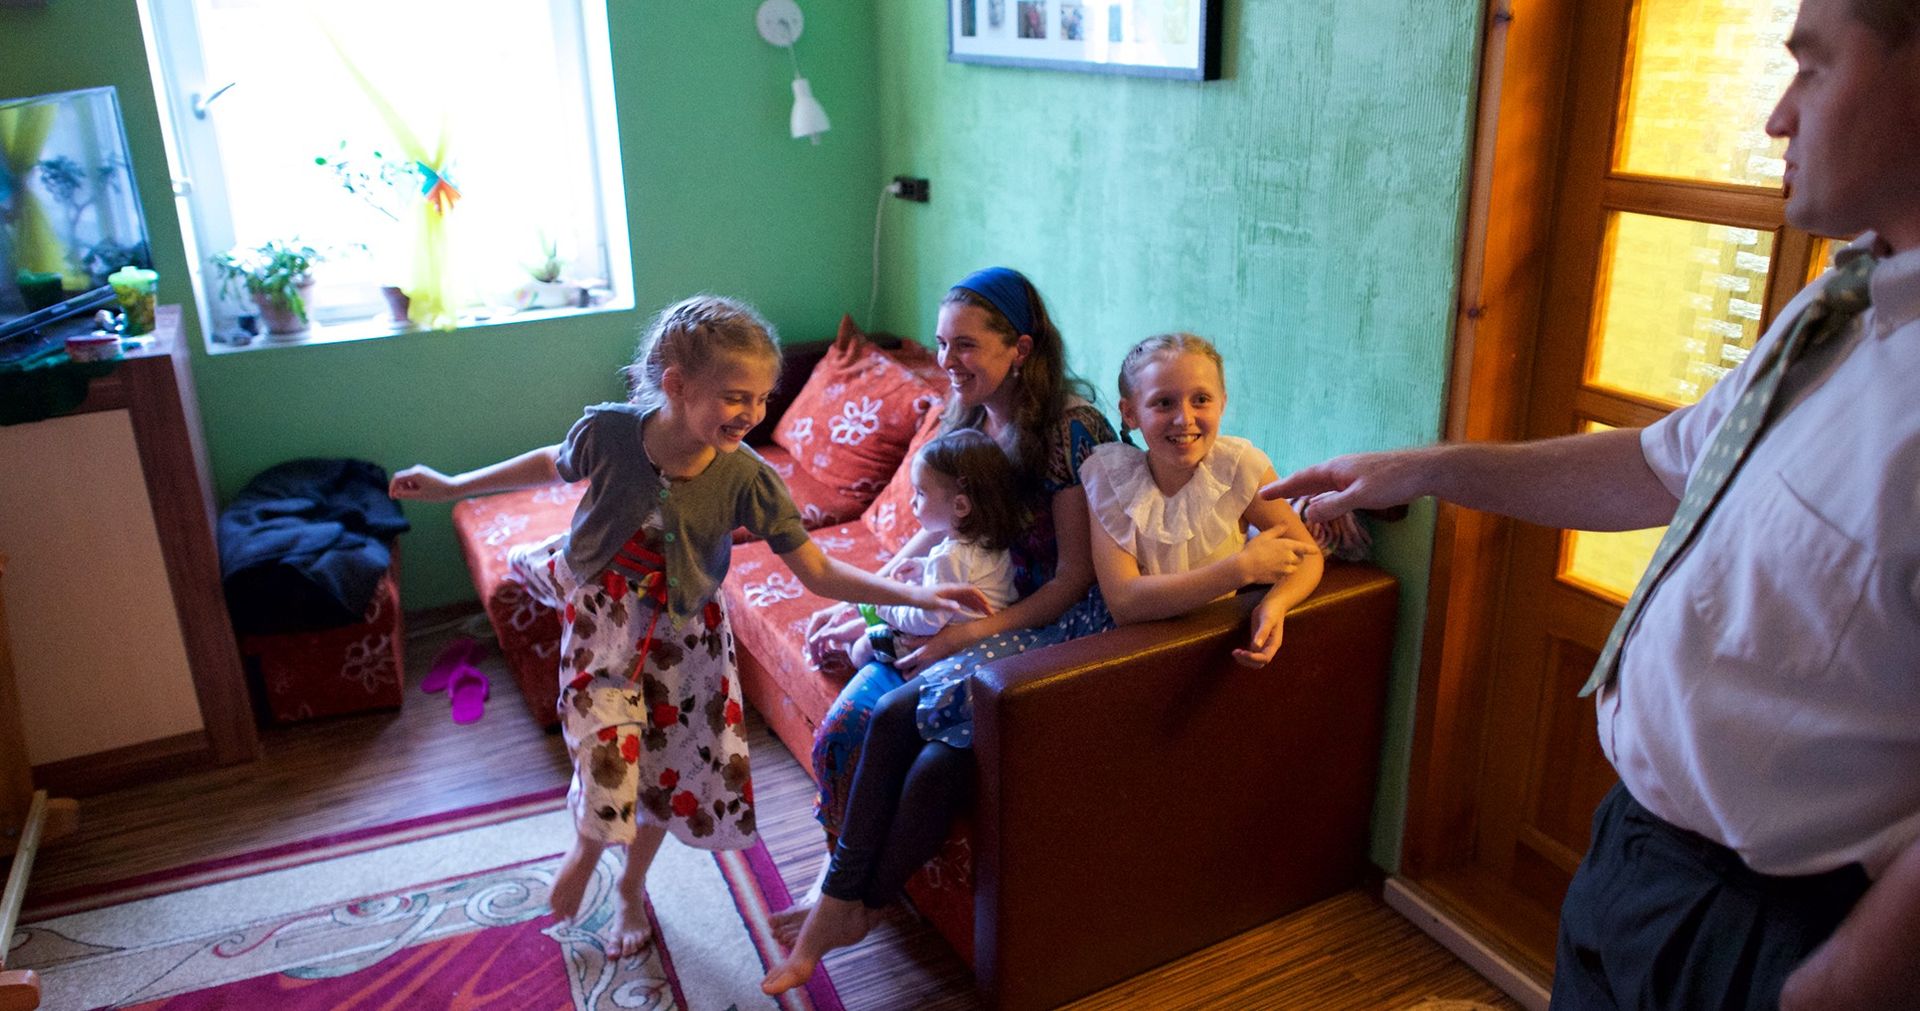 A young Latvian couple with three little girls smiling and playing together.